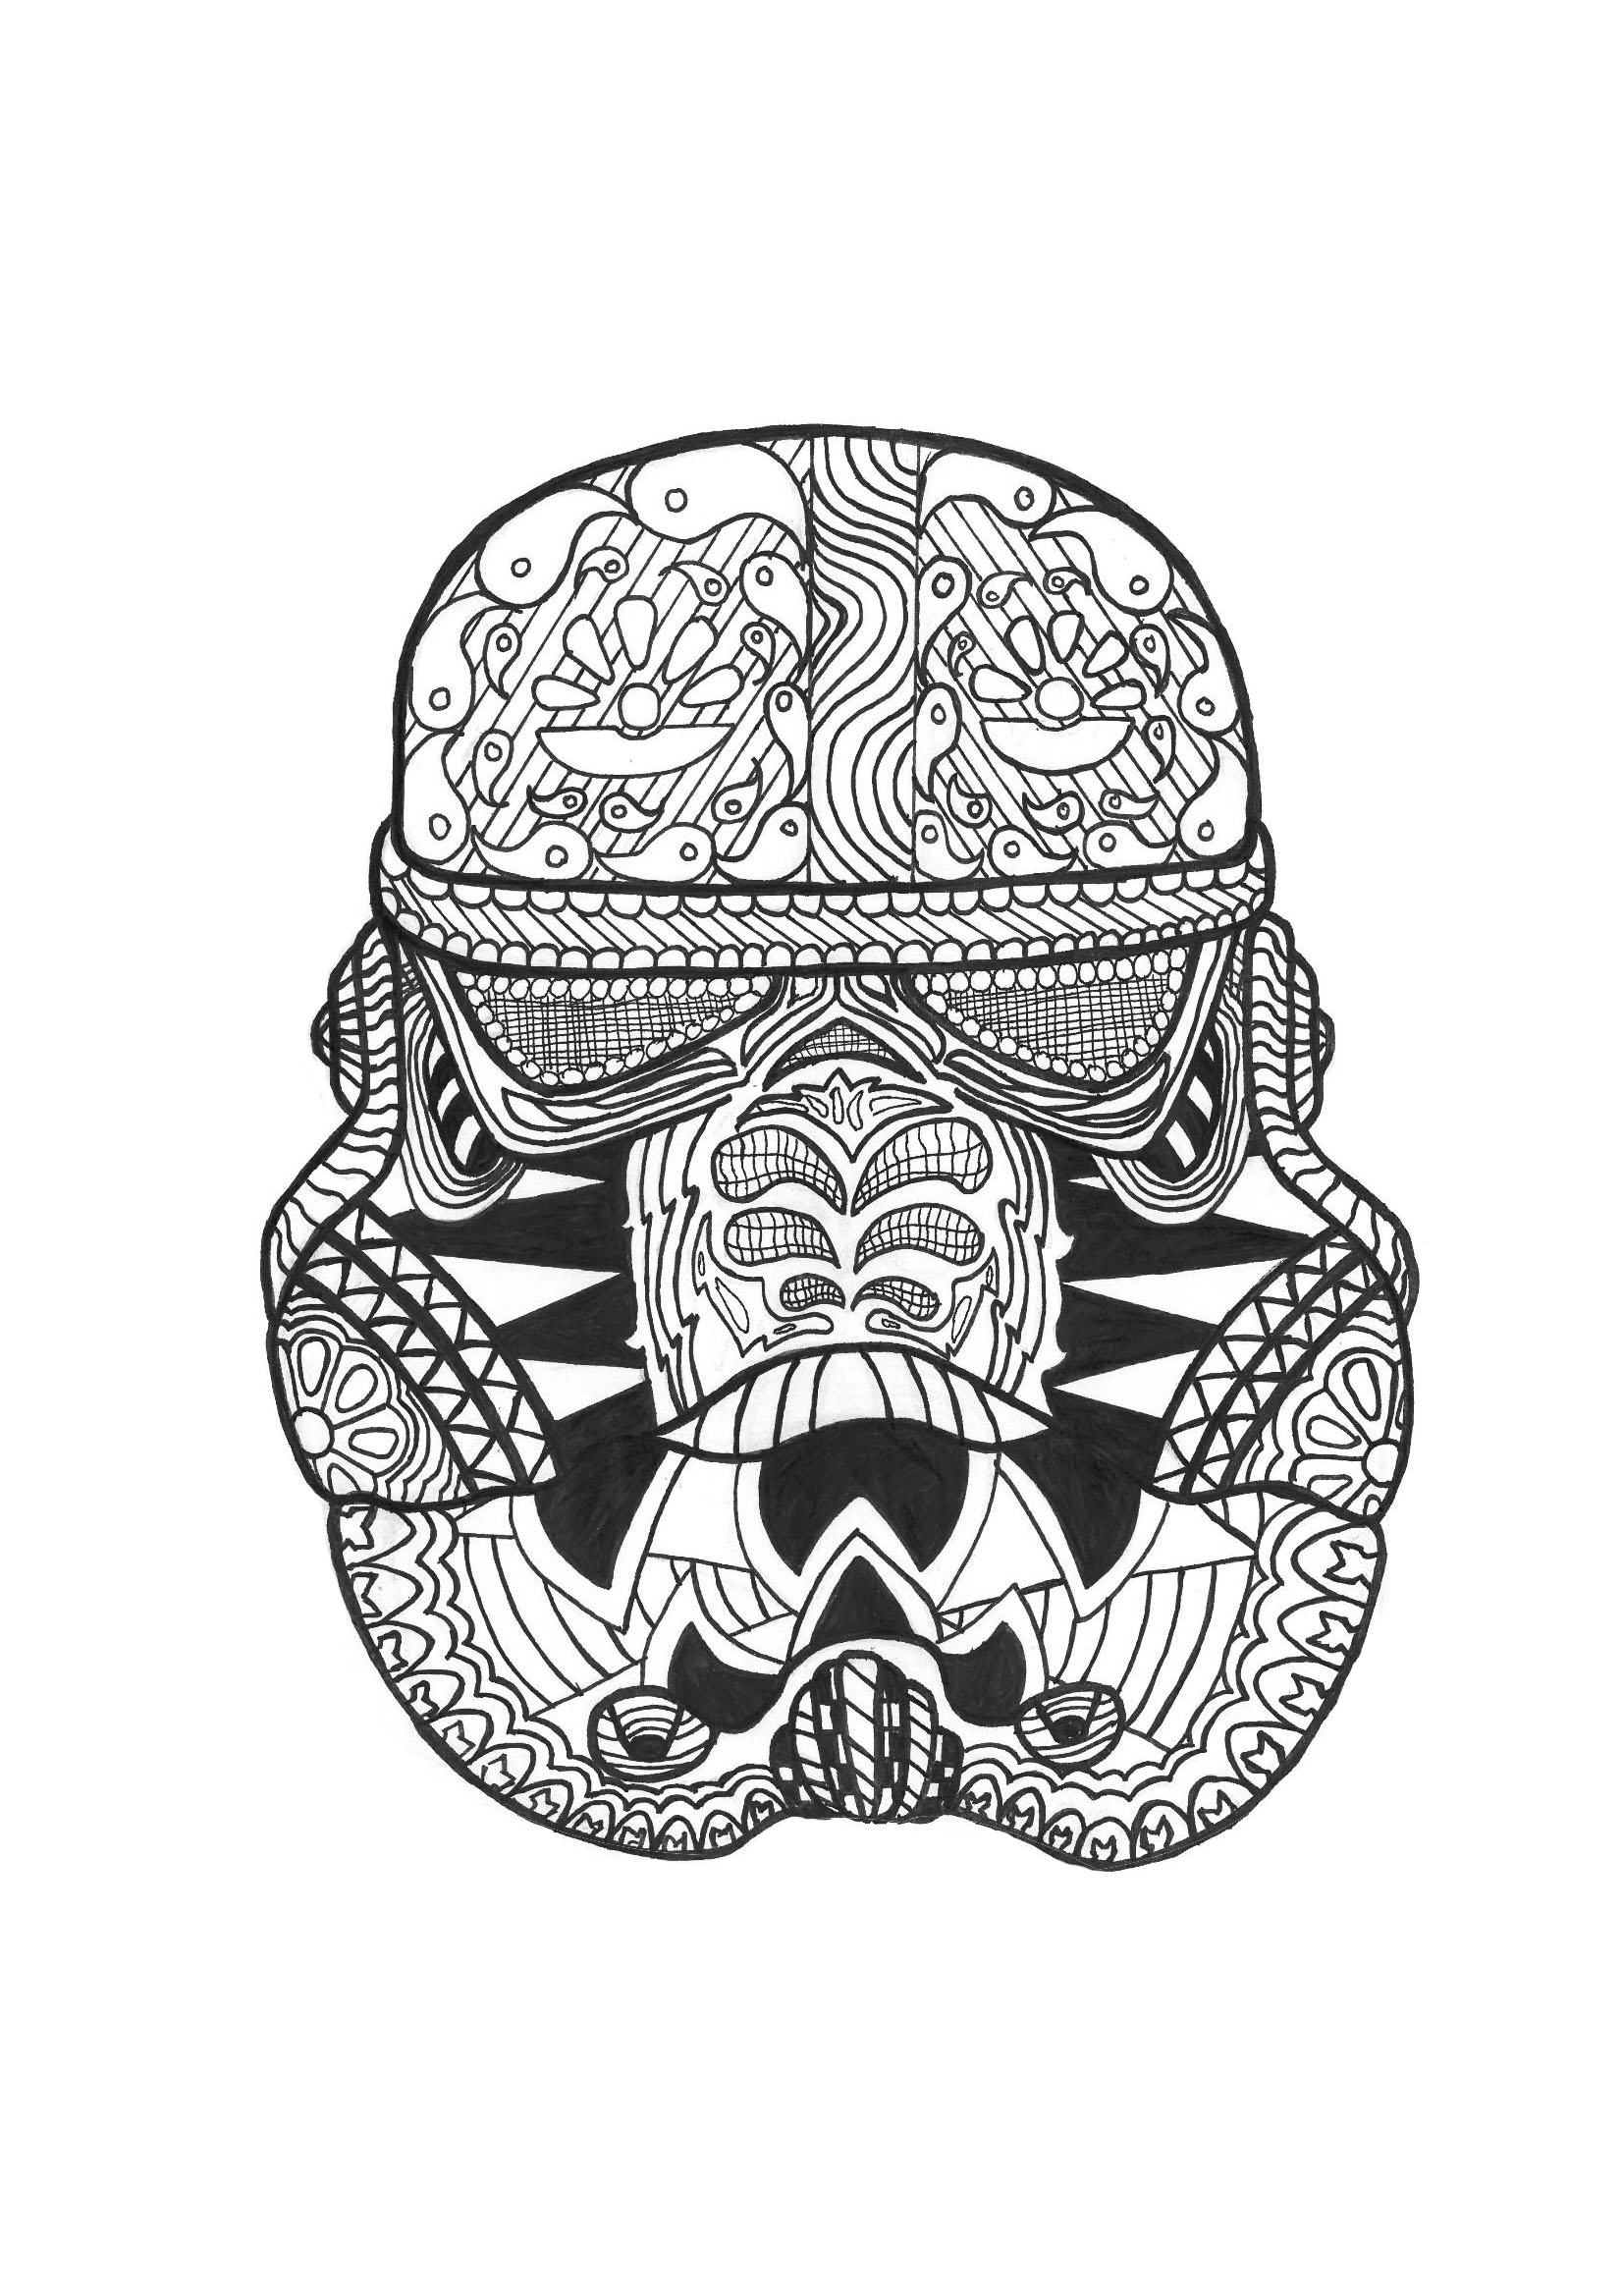 Coloring page of a Stormtrooper helmet (from Star Wars), Artist : Allan